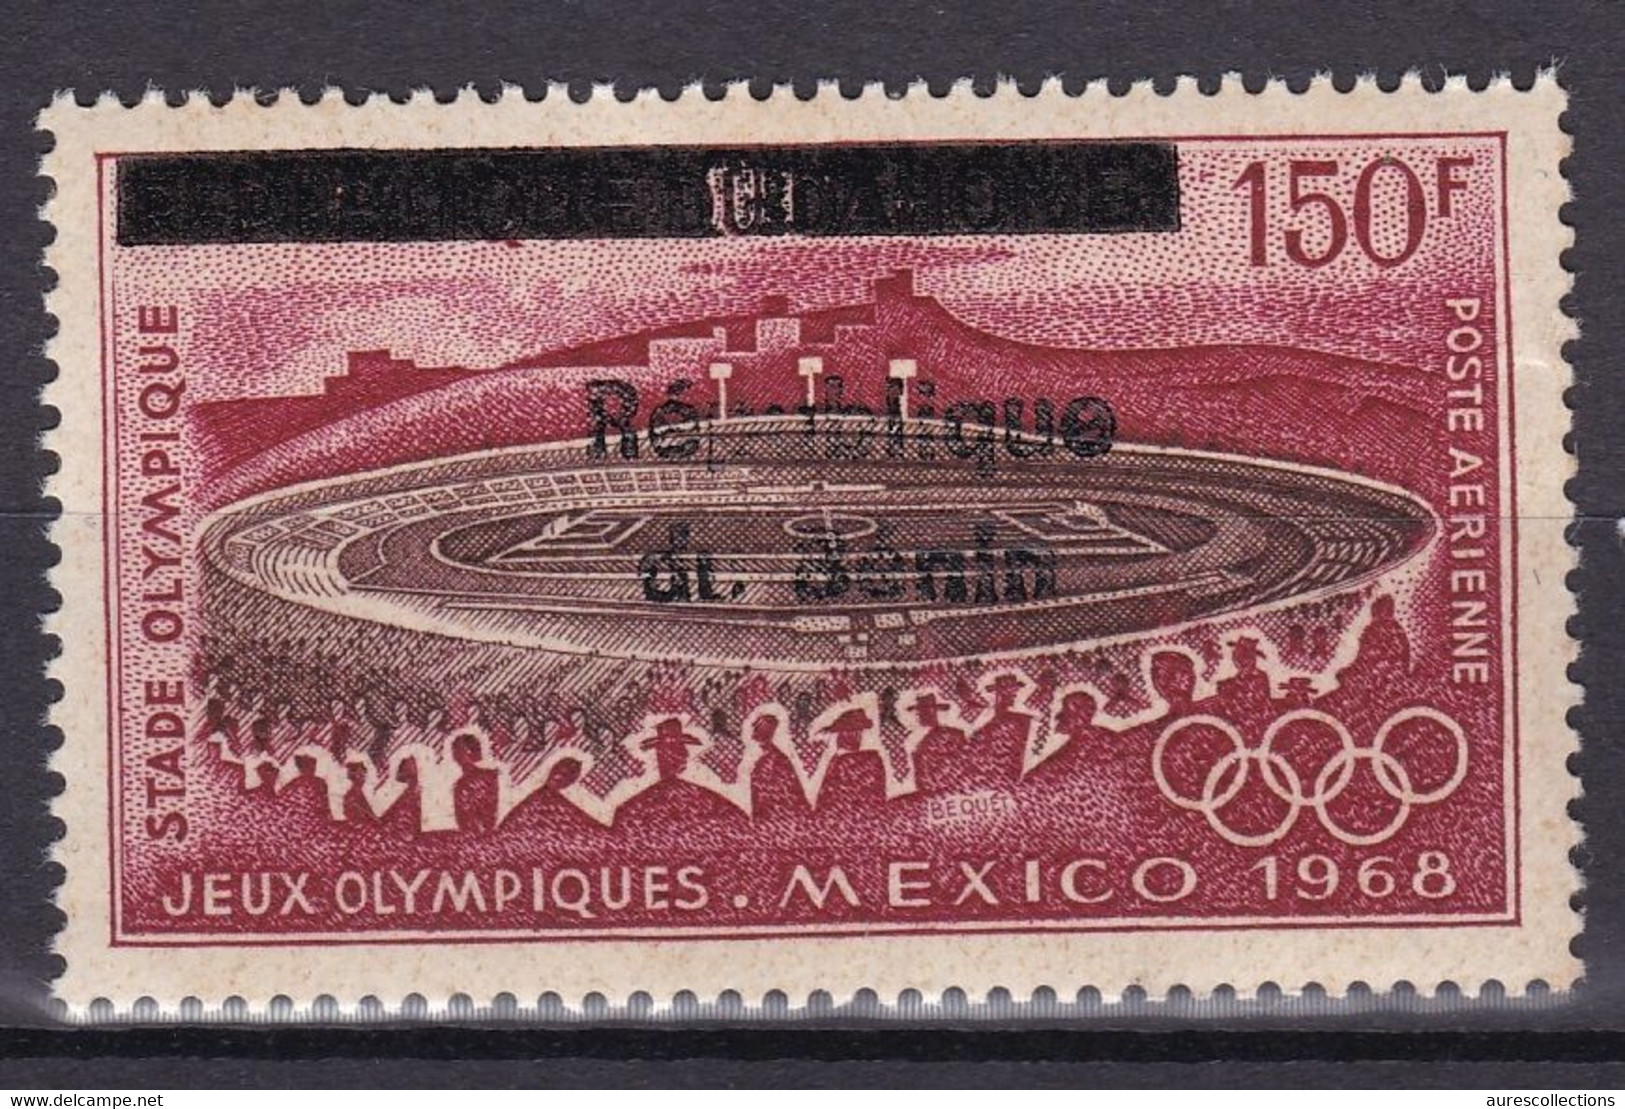 BENIN 1995 MICHEL 752 150F Val. 45€ - JEUX OLYMPIQUES MEXICO 1968 OLYMPIC GAMES - OVERPRINT SURCHARGE OVERPRINTED MNH - Bénin – Dahomey (1960-...)